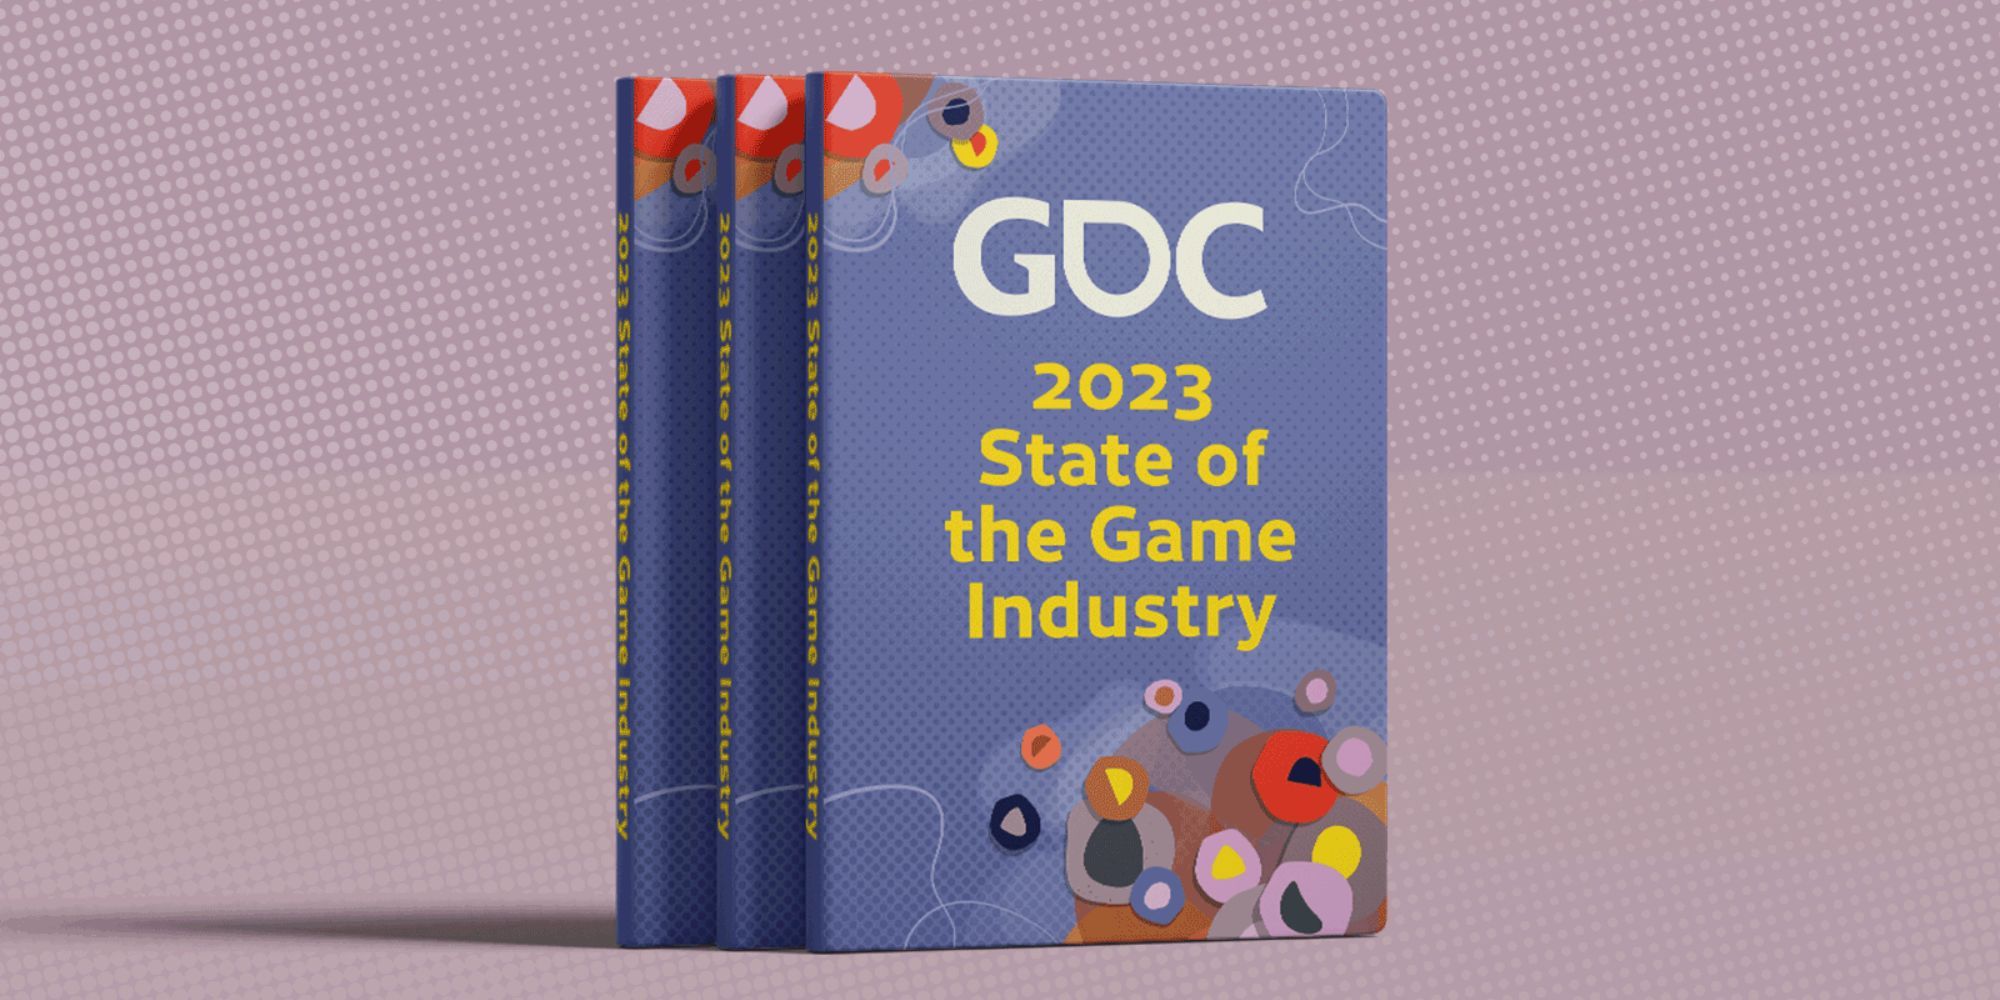 Image reads GDC 2023 State of the Game Industry